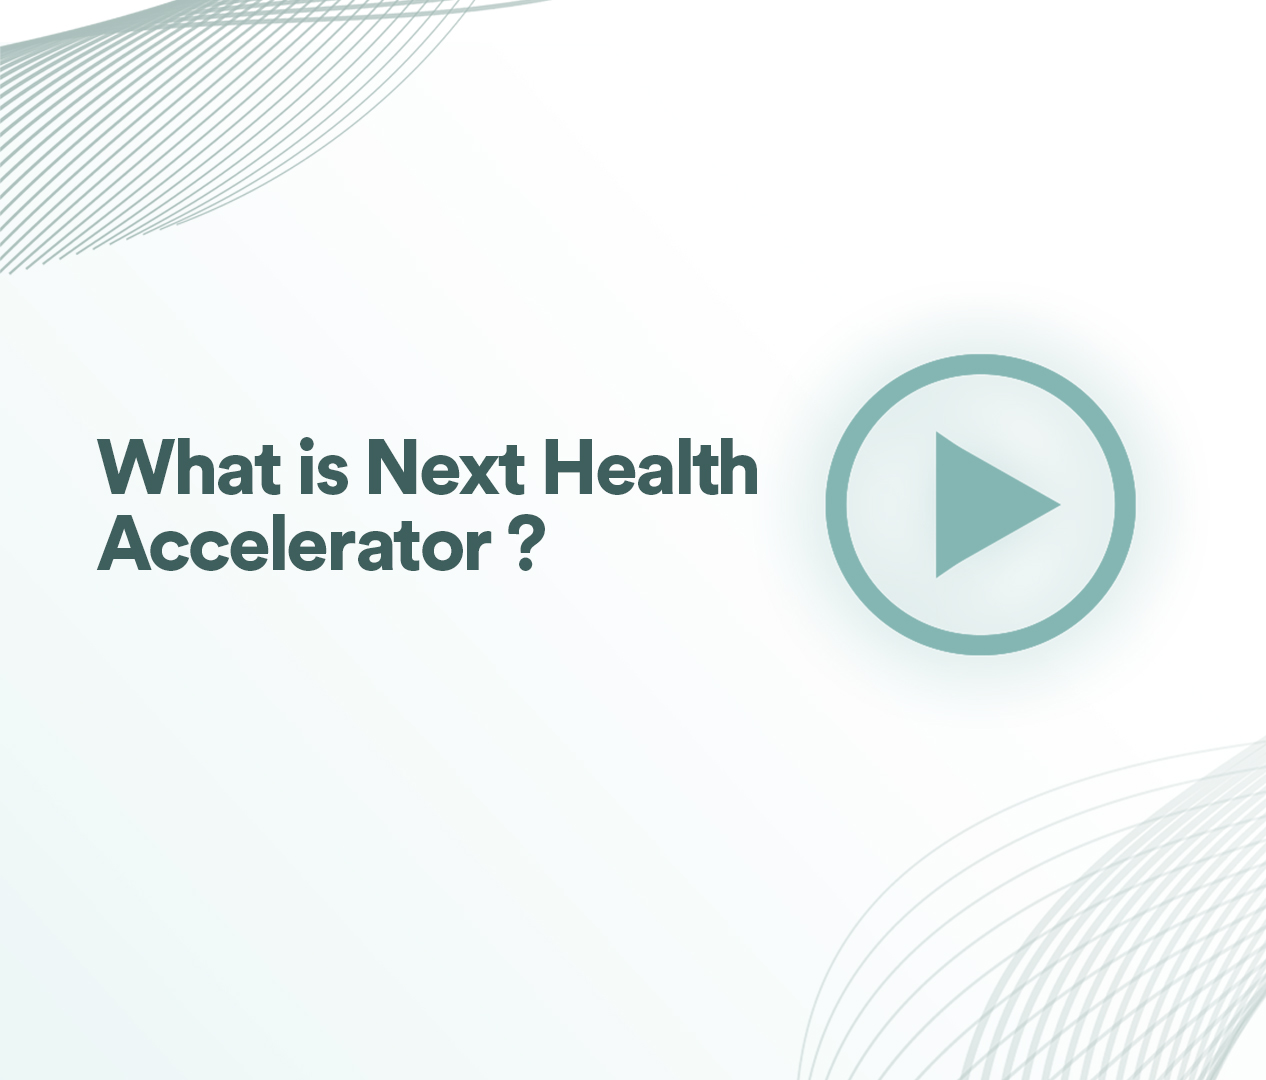 [Video] What is Next Health Accelerator ?